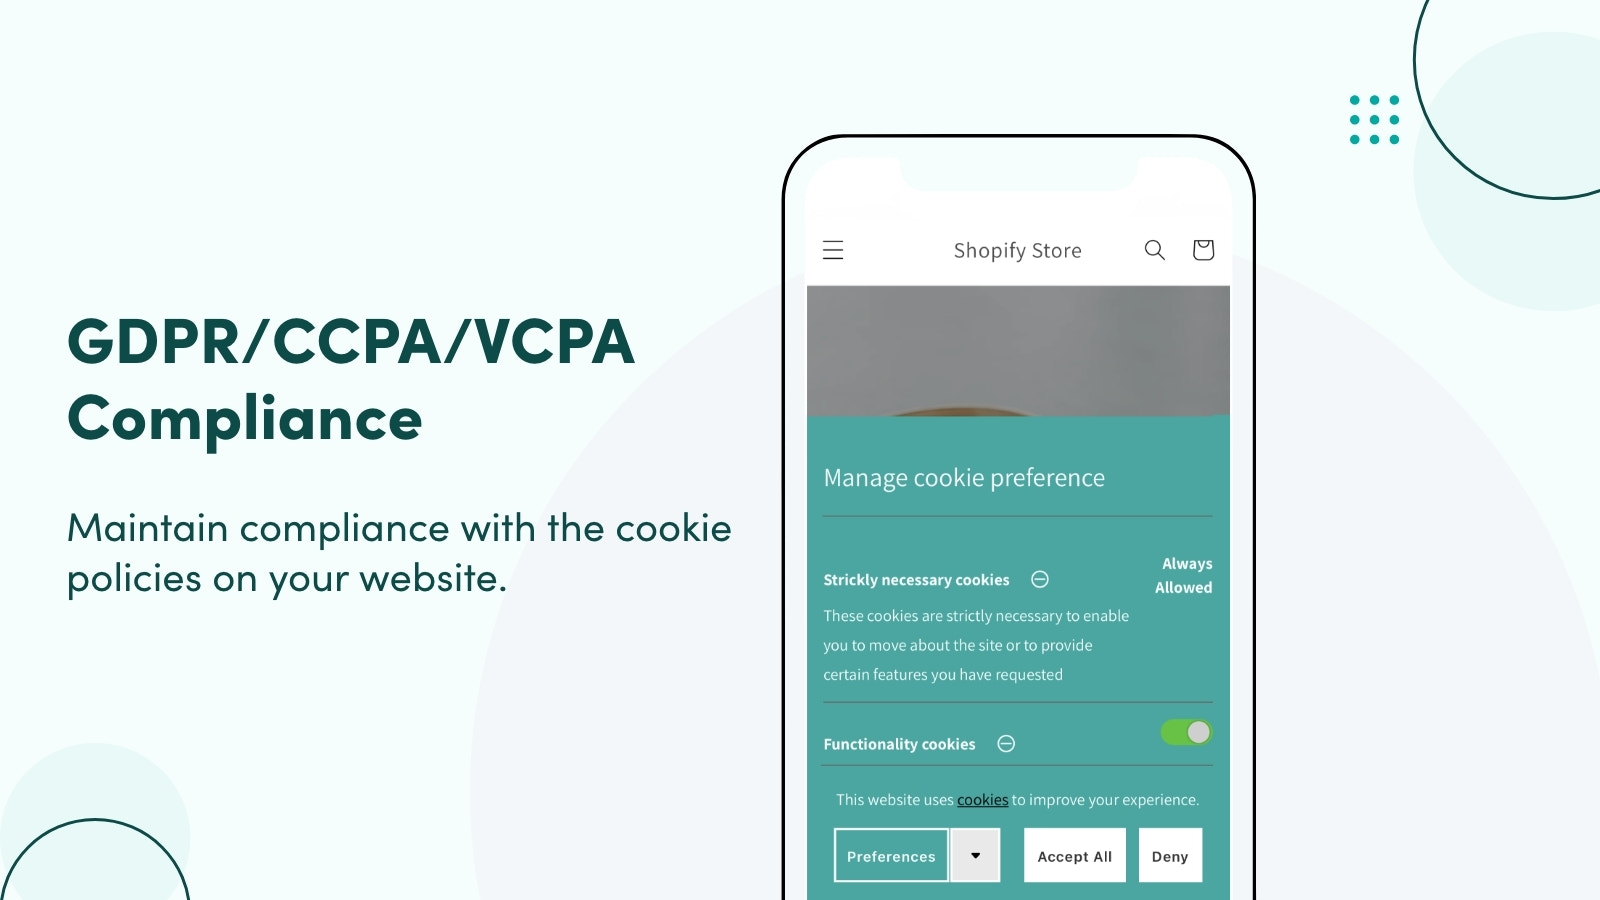 Maintain compliance with the cookie policies on your website.